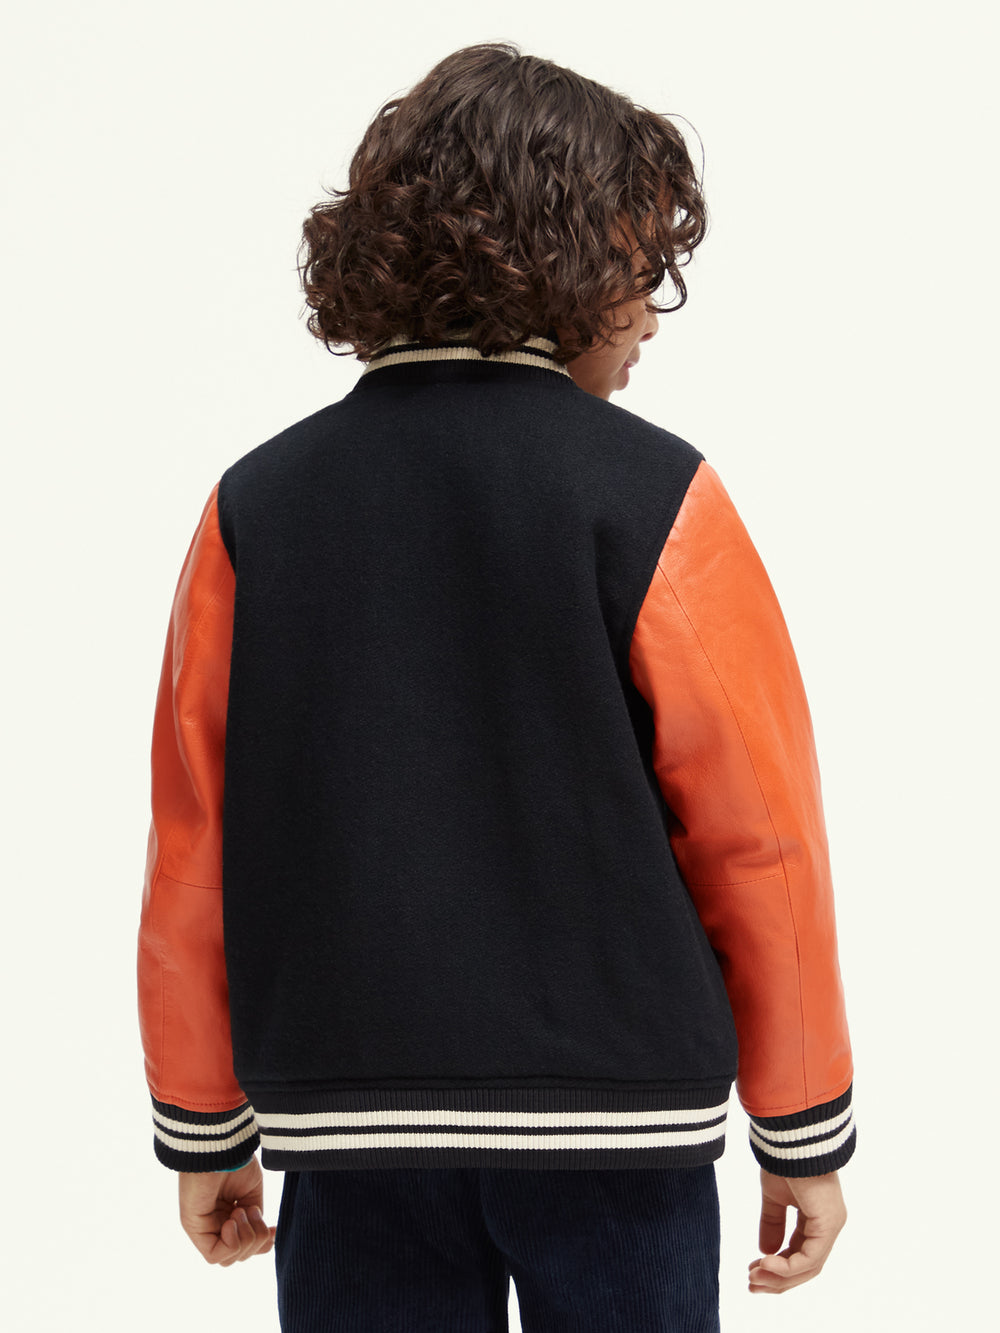 Kids - Wool college jacket with leather sleeves - Scotch & Soda NZ